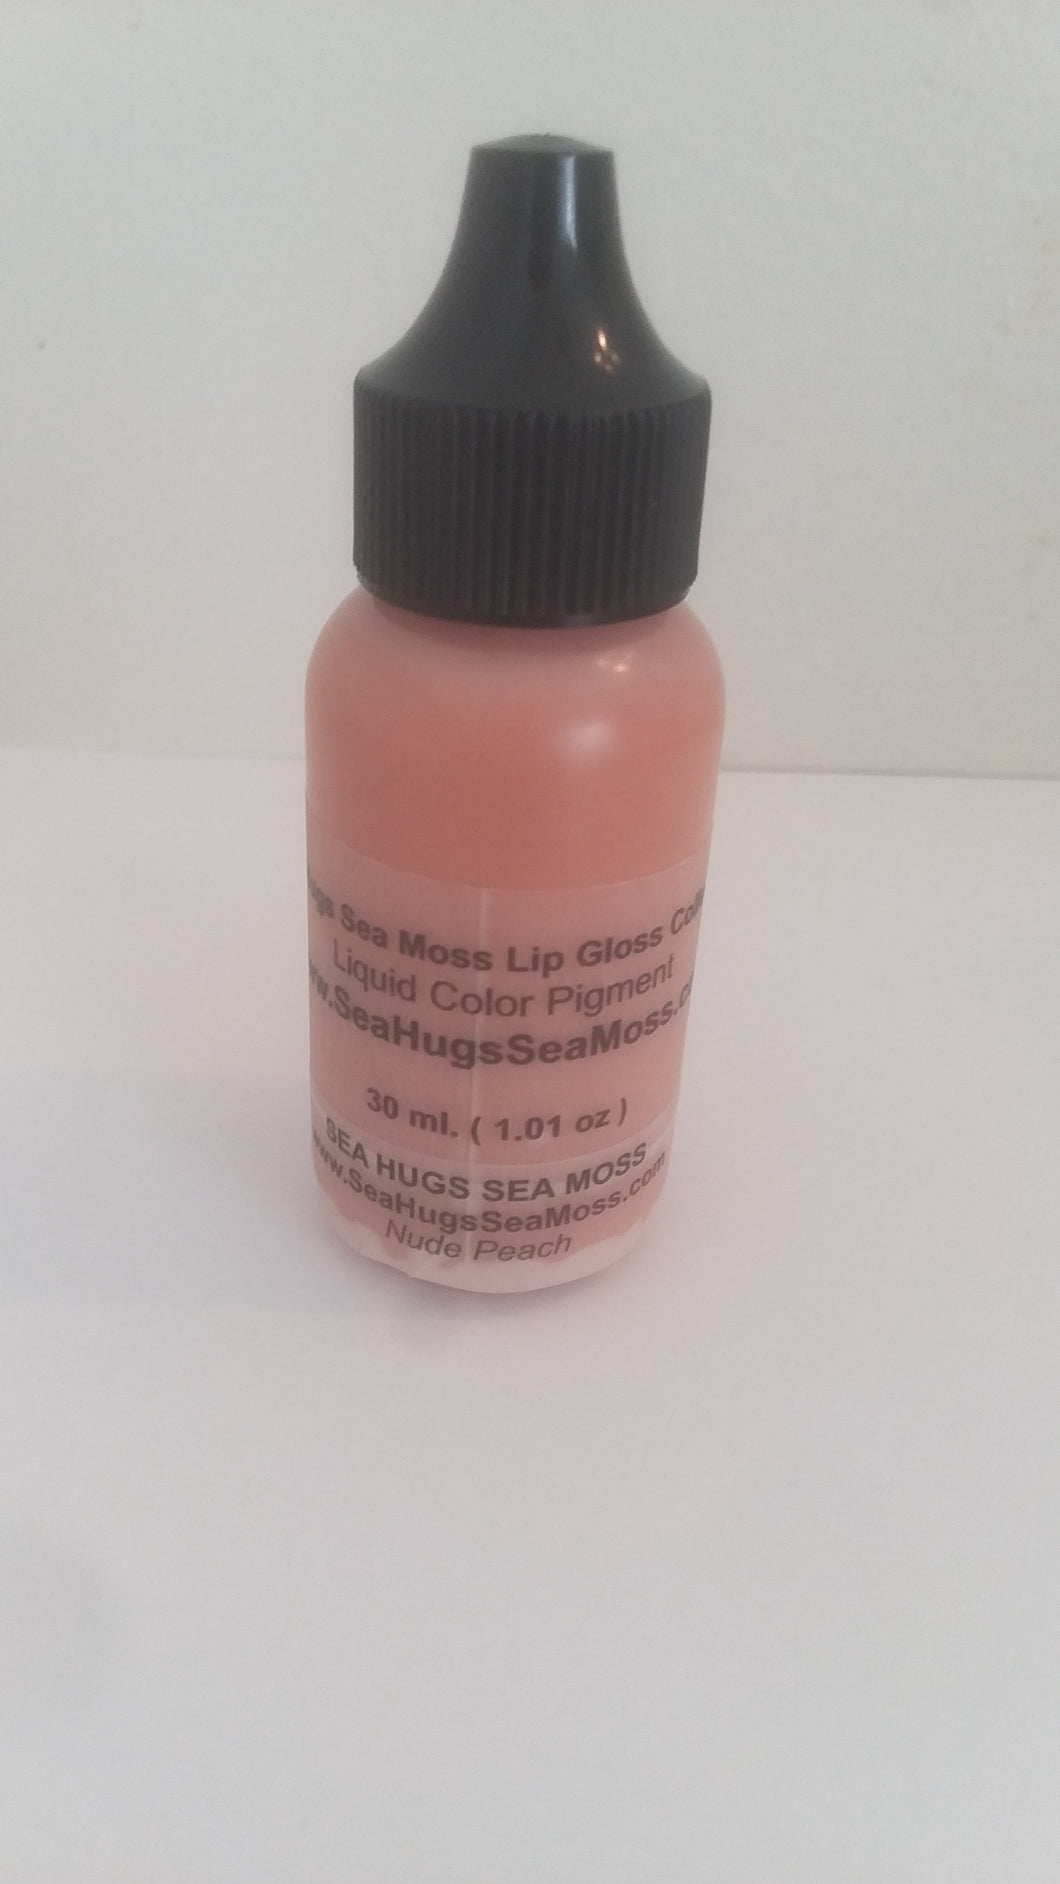 Highly Concentrated Liquid Color Pigment Colorants for Lip Gloss Making